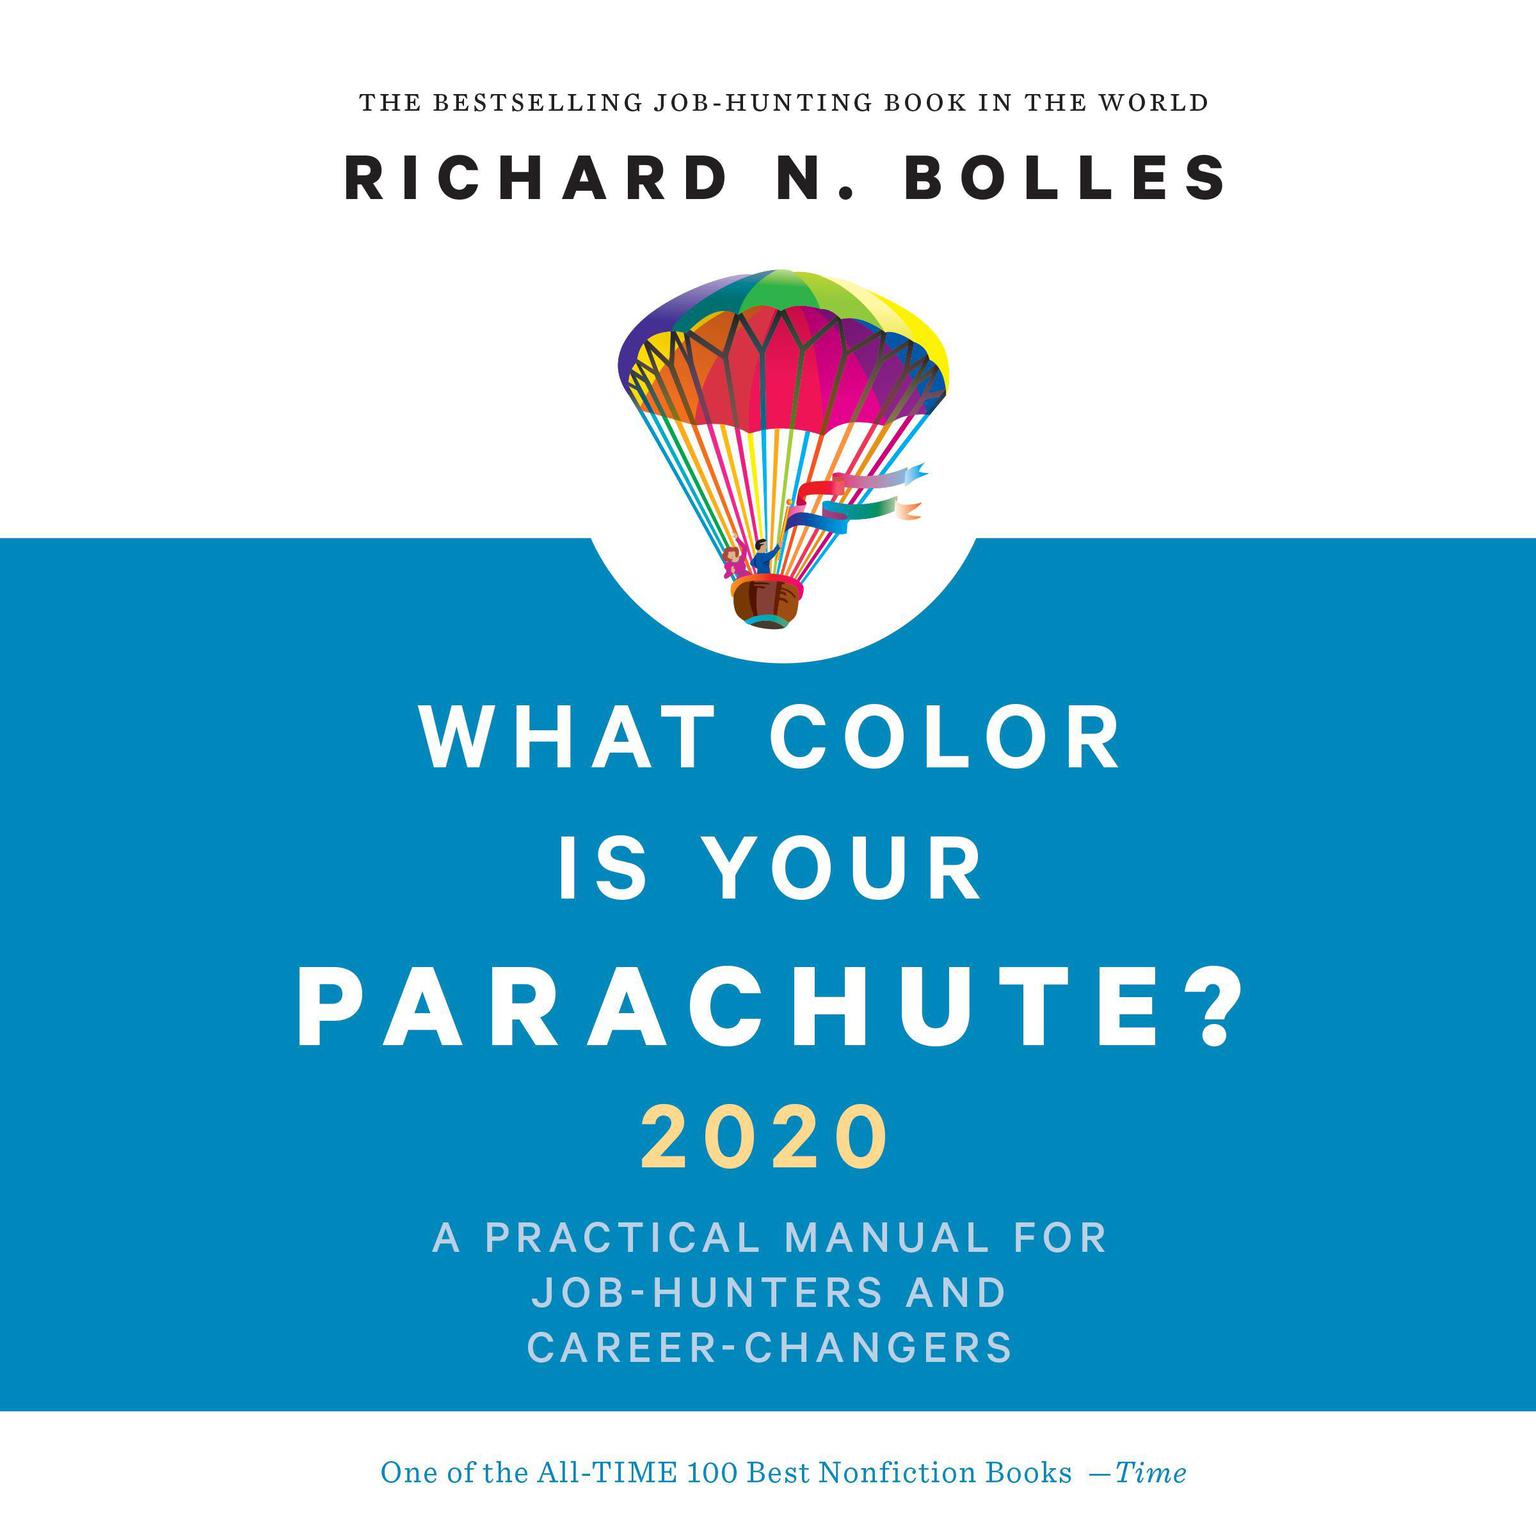 What Color is Your Parachute? 2020: A Practical Manual for Job-Hunters and Career-Changers Audiobook, by Richard N. Bolles